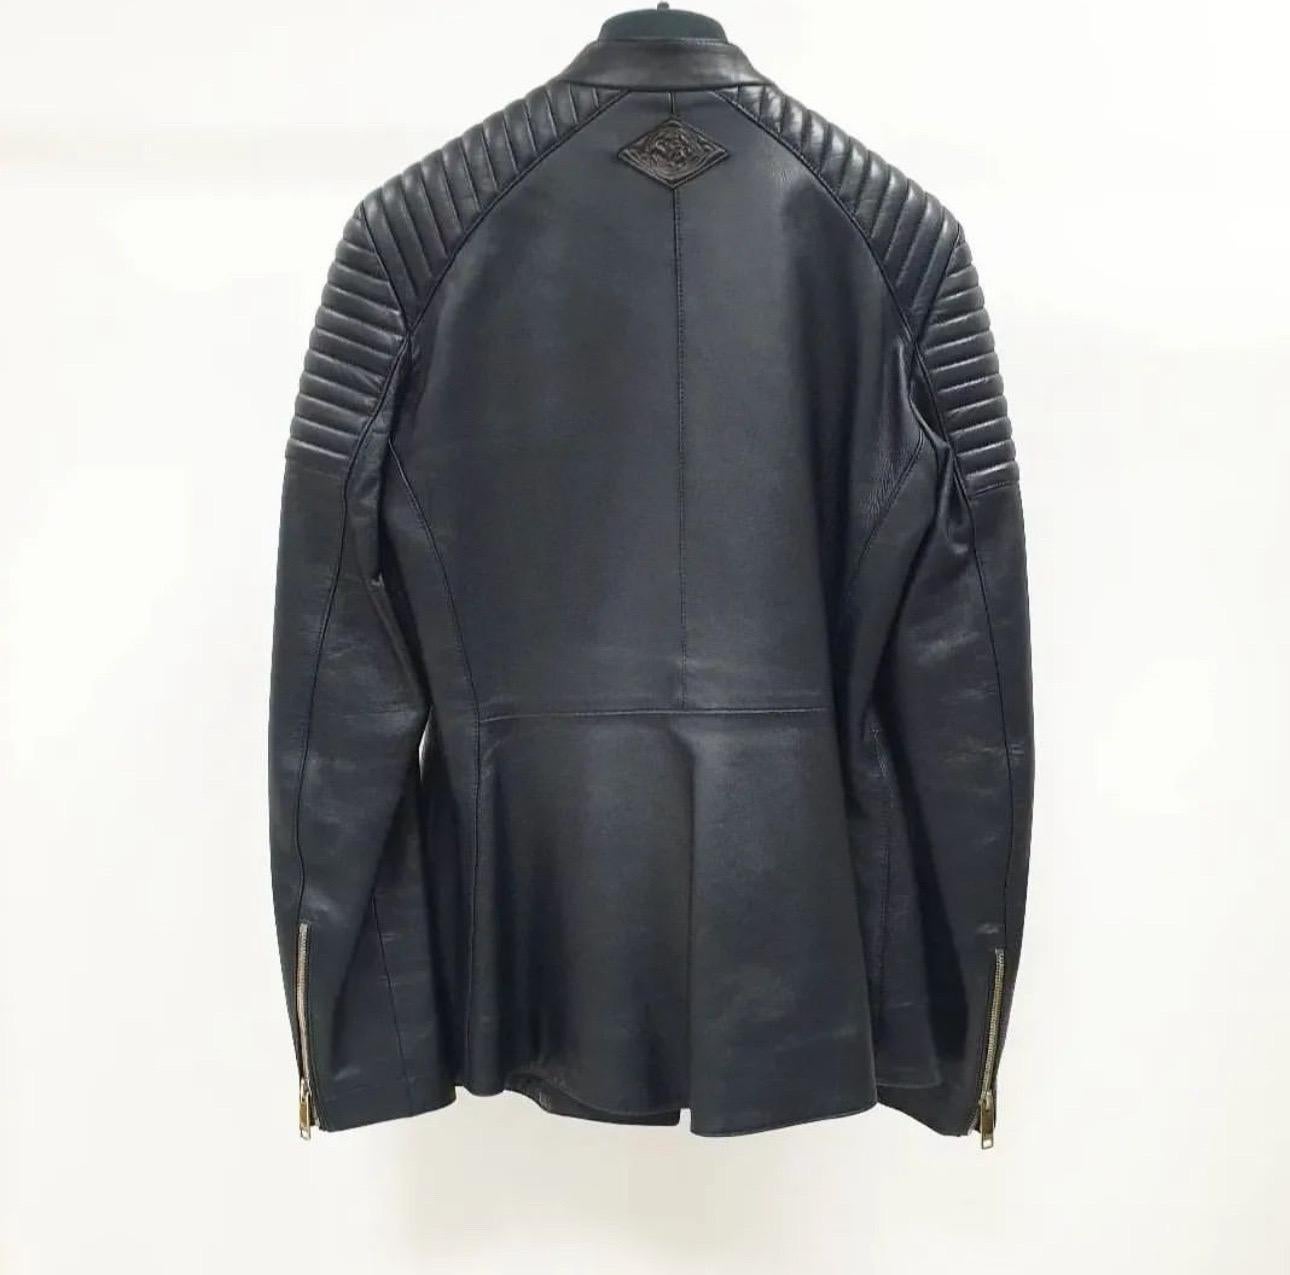  Christian Dior Biker jacket in black lamb leather (100%). Lined in black silk (100%). 
Opens with two buttons on the collar and an asymmetrical zipper on the front. 
Features logo details in the front and upper back, silver zippers on the front